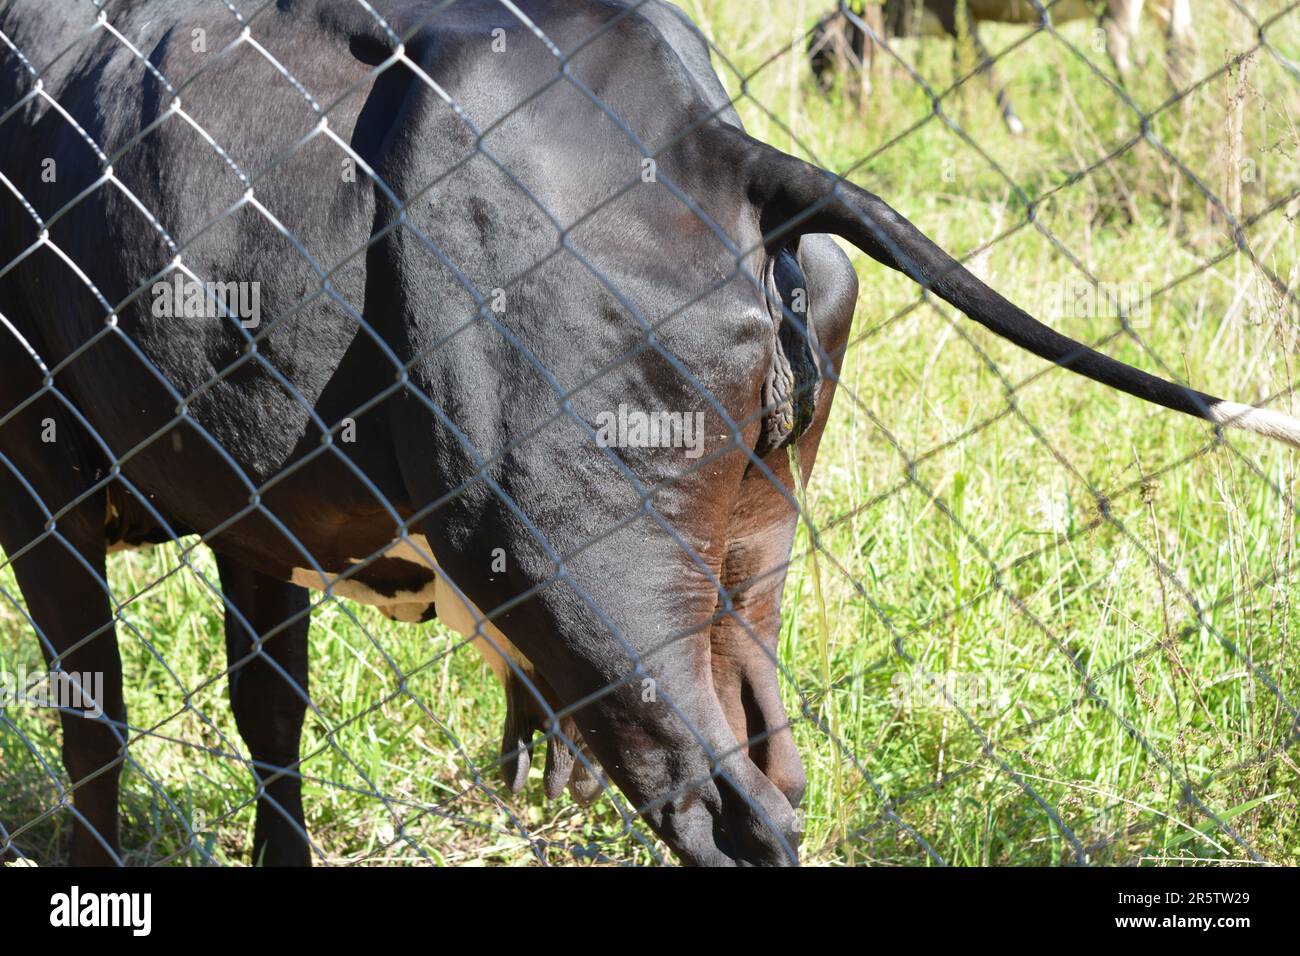 Cow urinating on Brazilian cattle farm in pasture, protected by guardrail, Brazil, South America, portrait photo Stock Photo